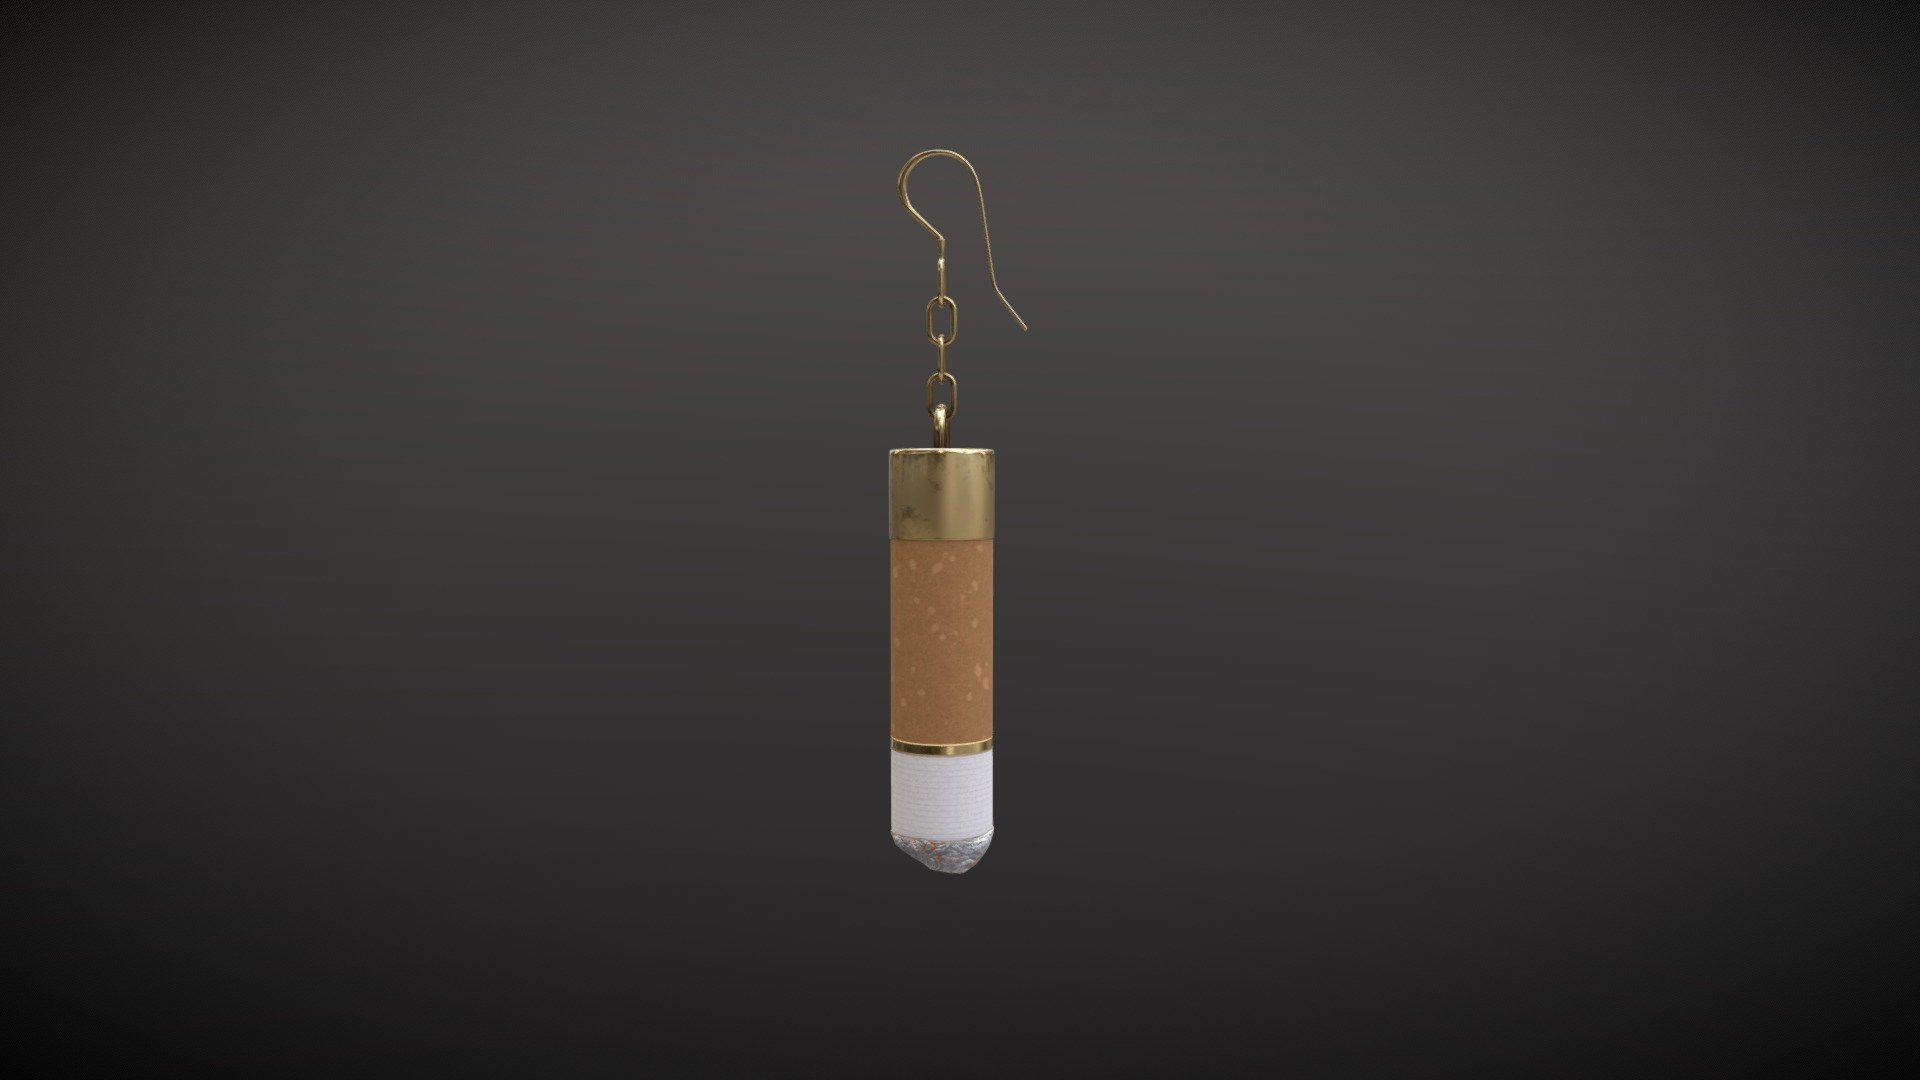 Cigarette earring. For every proud smoker.
I made it in Blender 3D and textured in Substance Painter 3d model